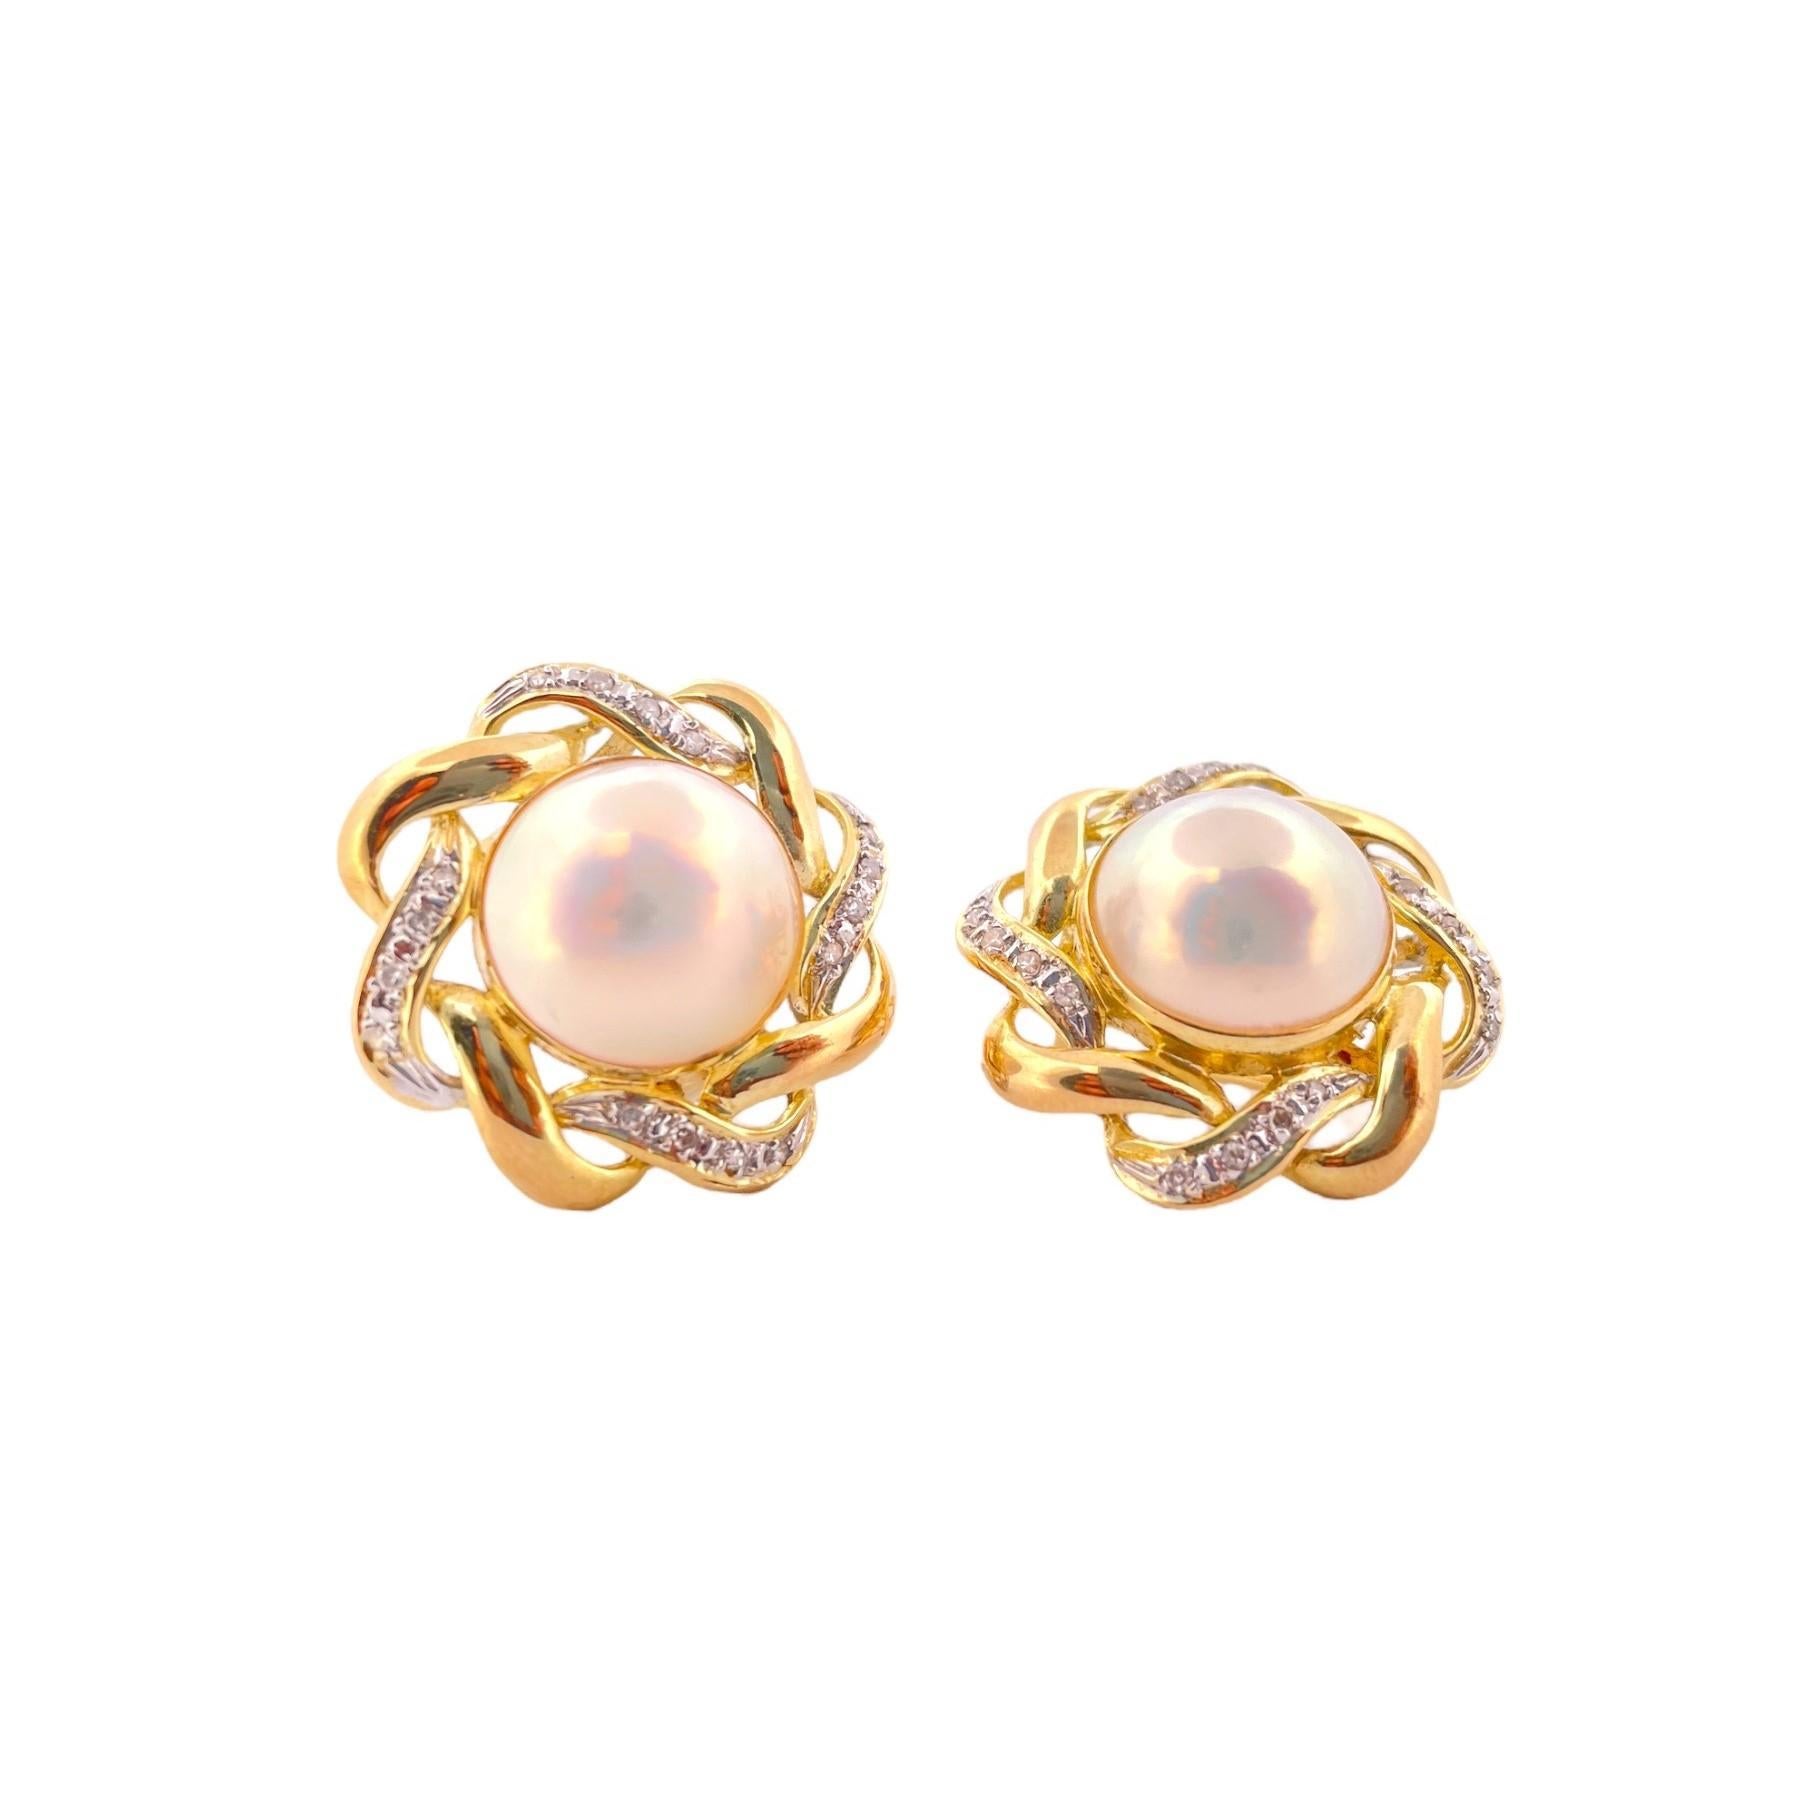 Modern Mabe Pearl and Diamond Earrings - 14K Yellow Gold